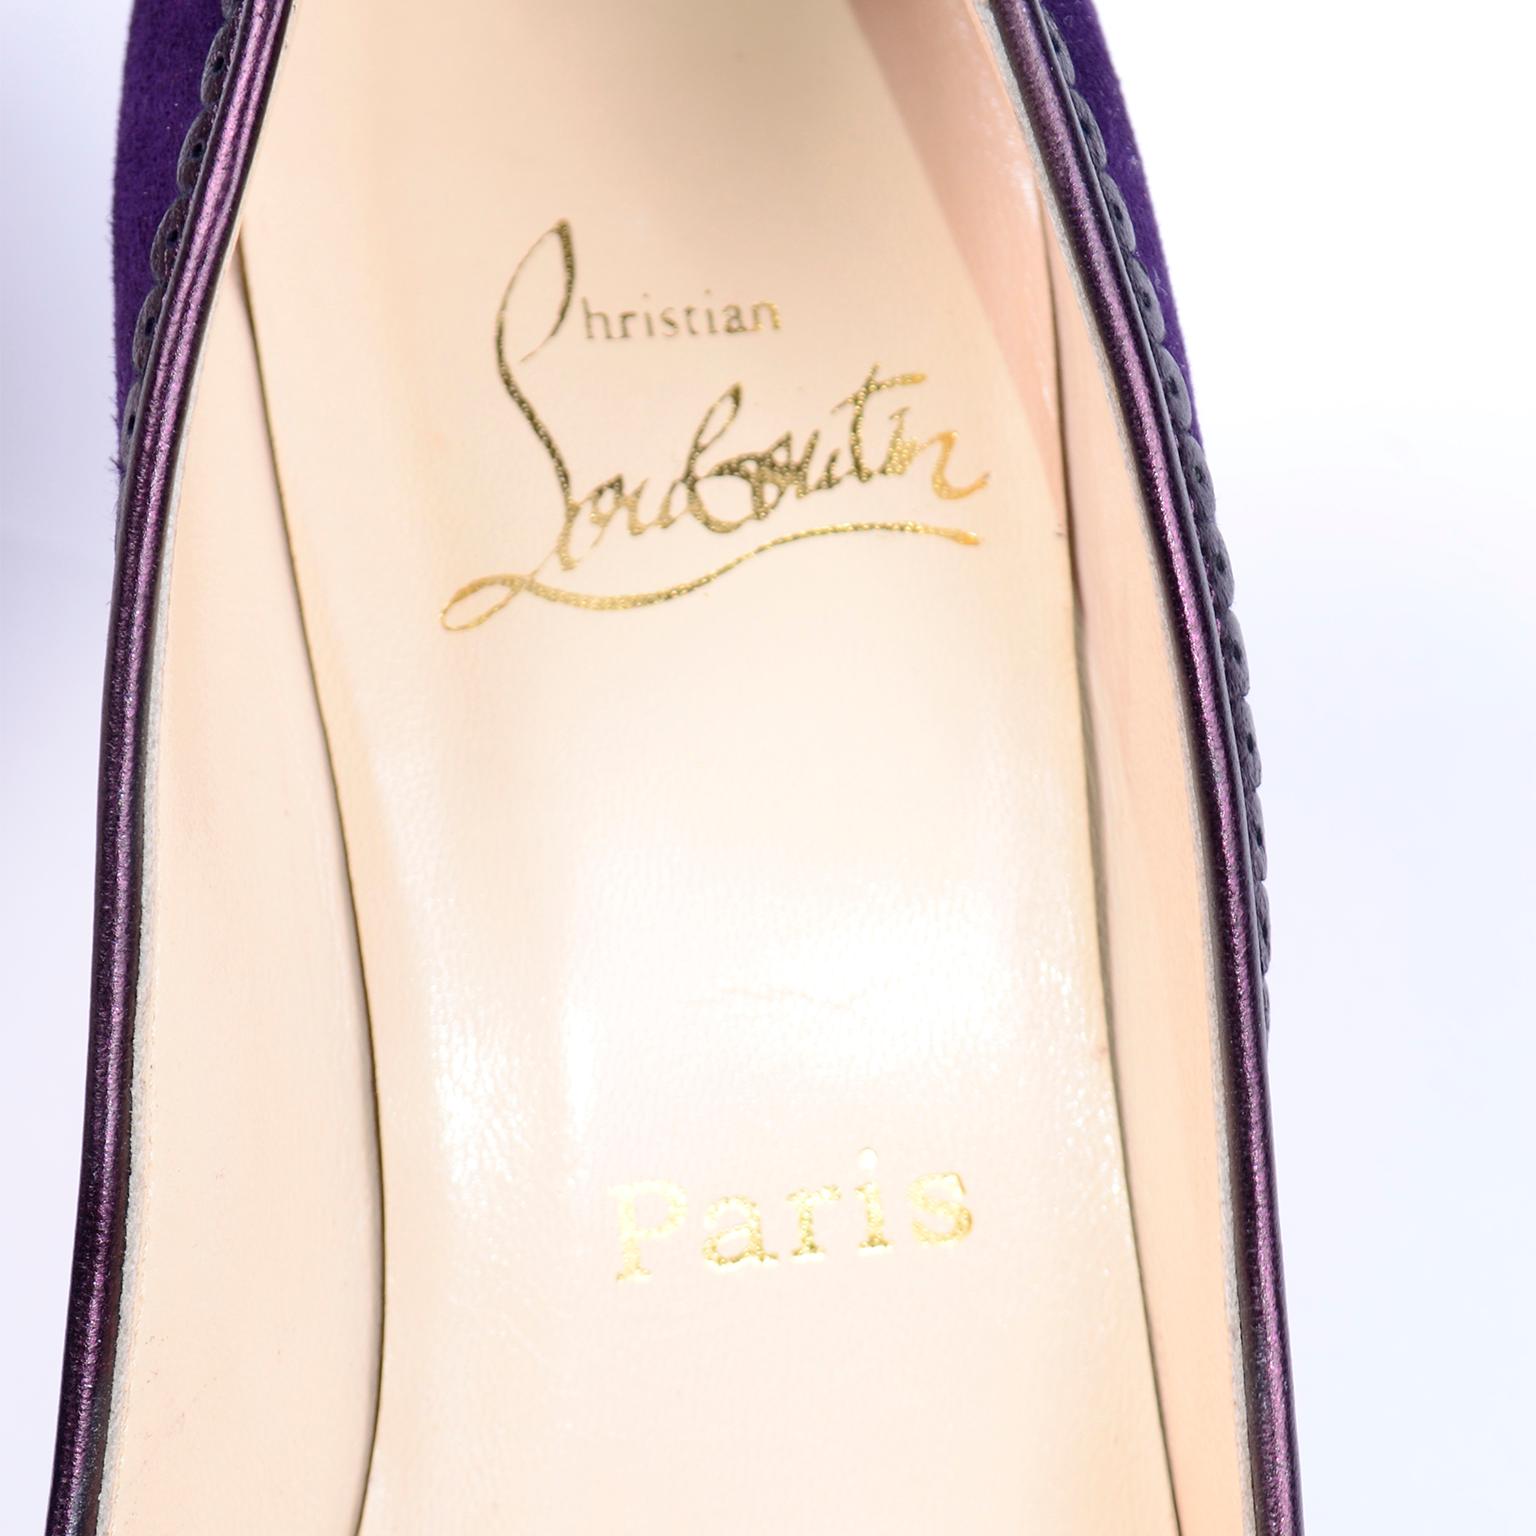 Christian Louboutin Alice Shoes Purple Suede Bow Pumps With 3